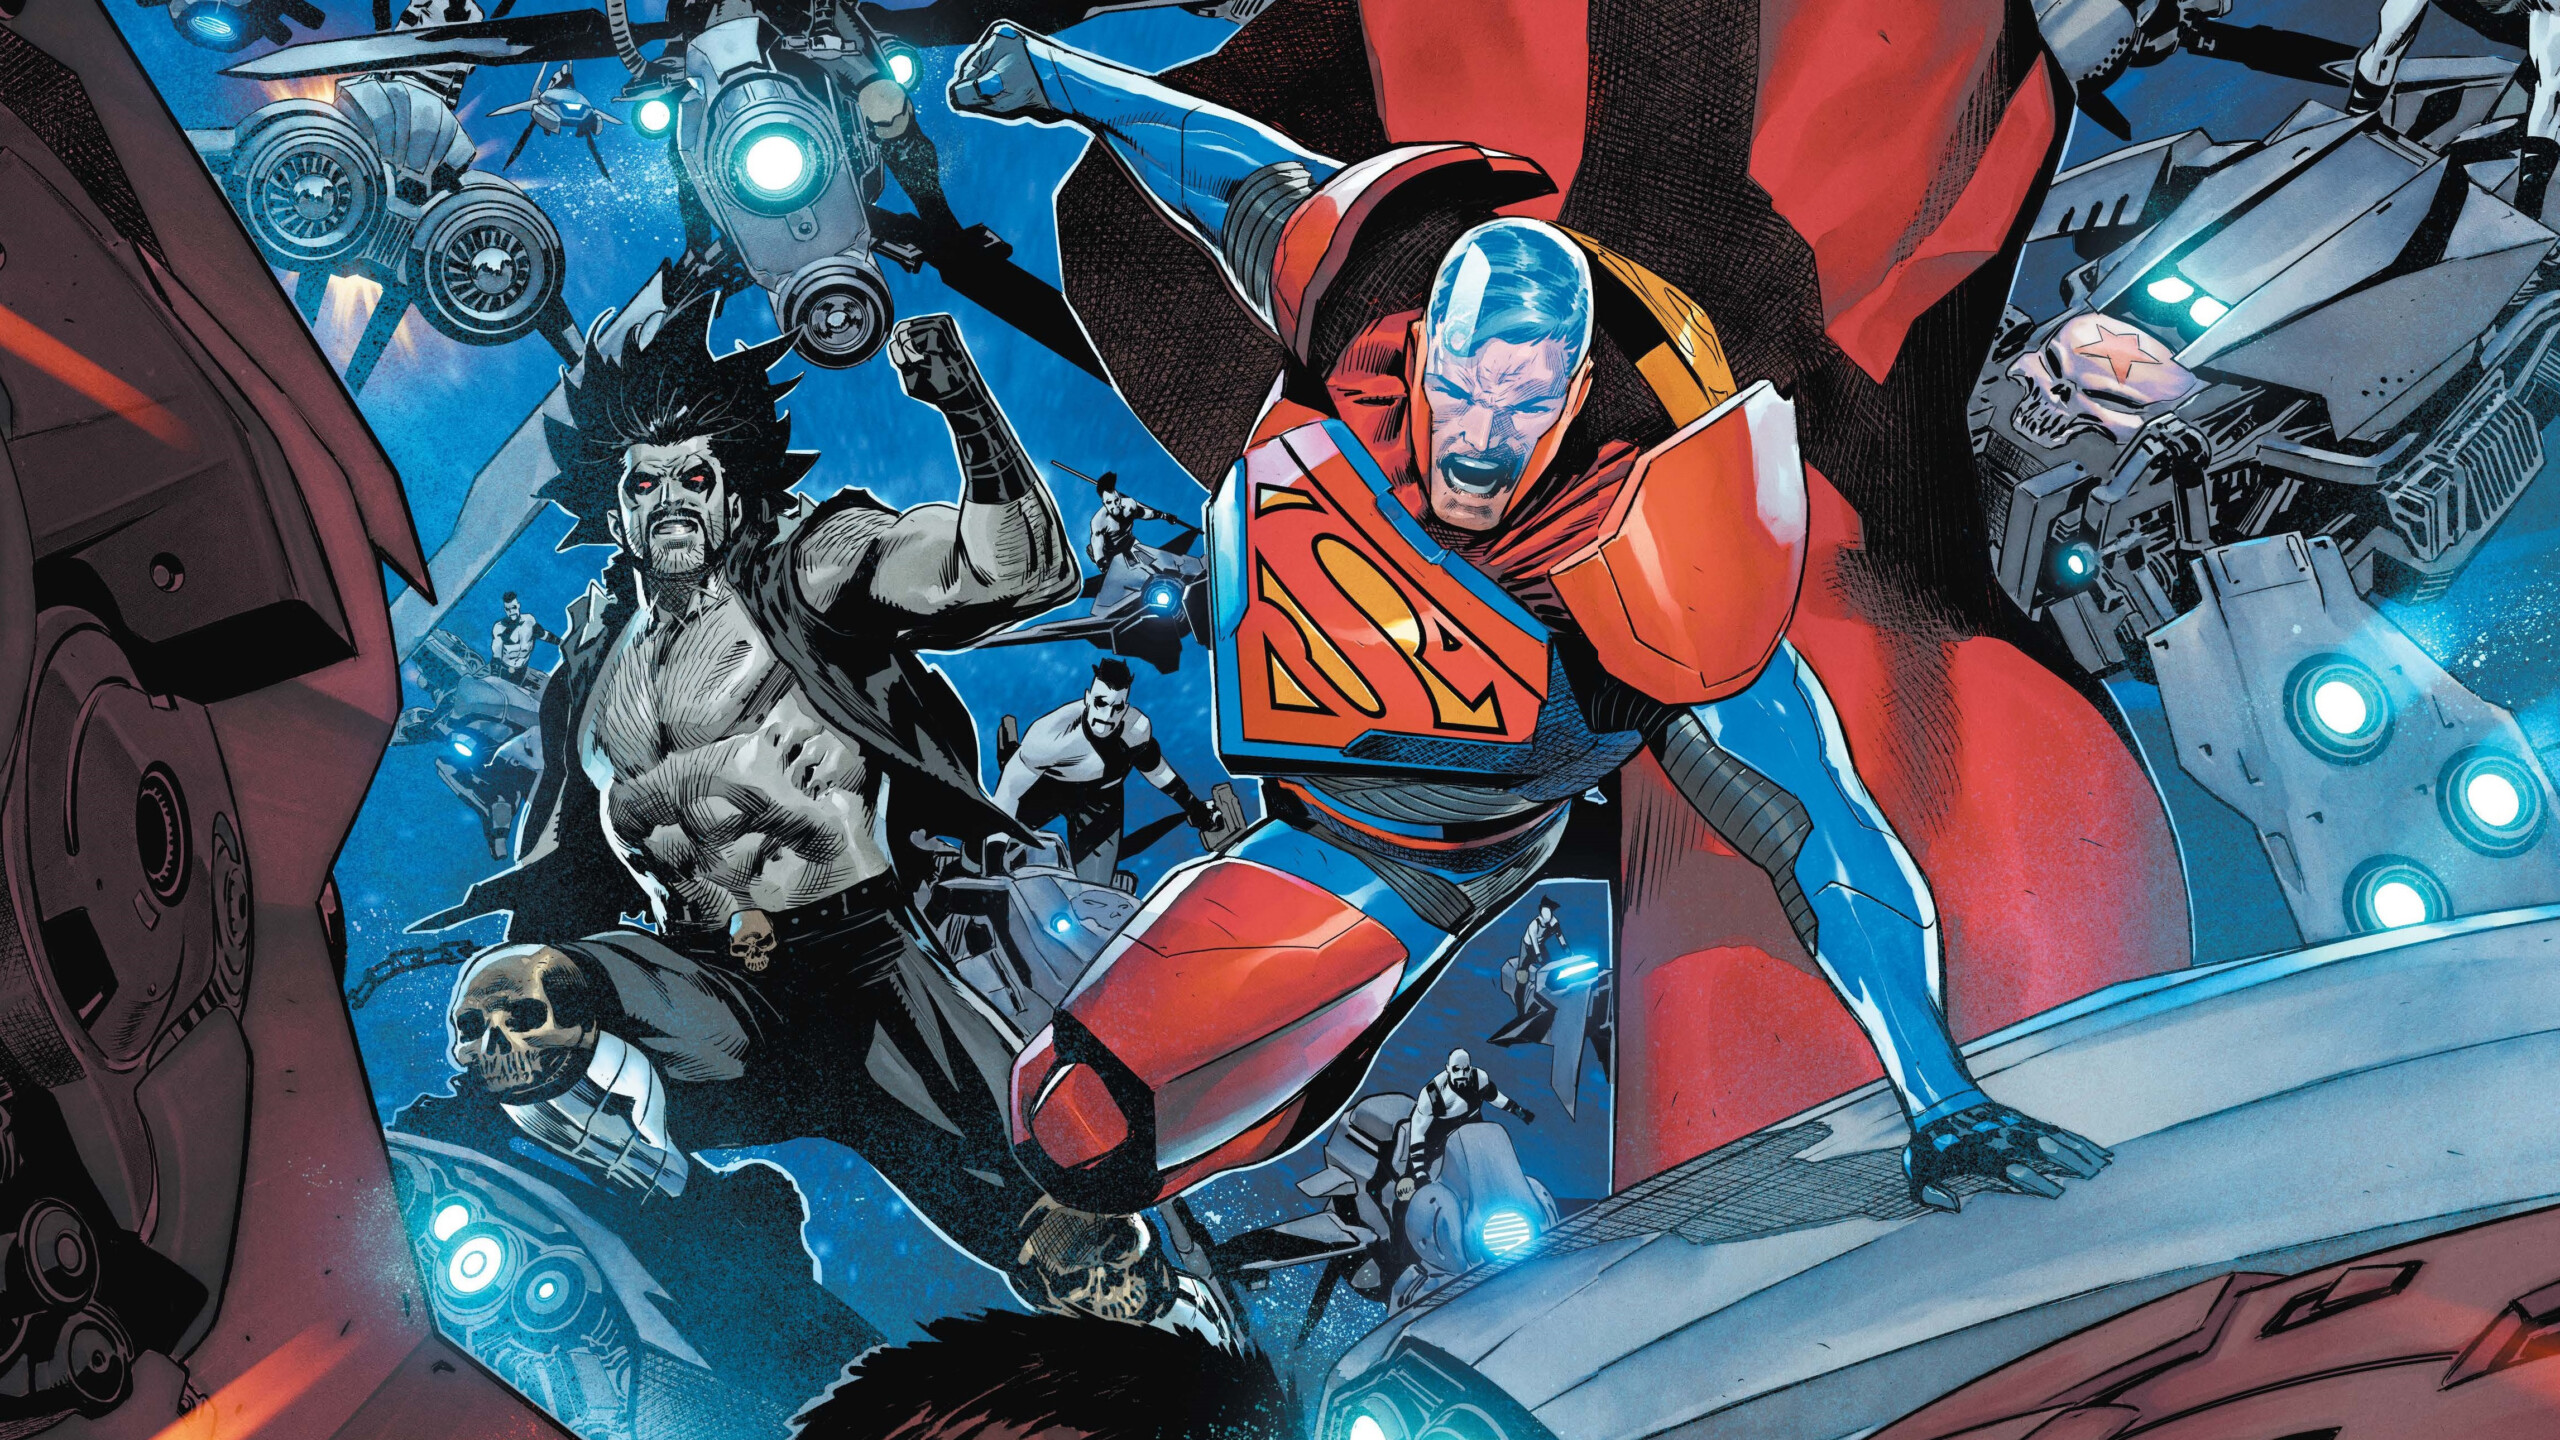 Superman and Lobo’s uneasy alliance is put to the test in a massive House of Braniac art preview